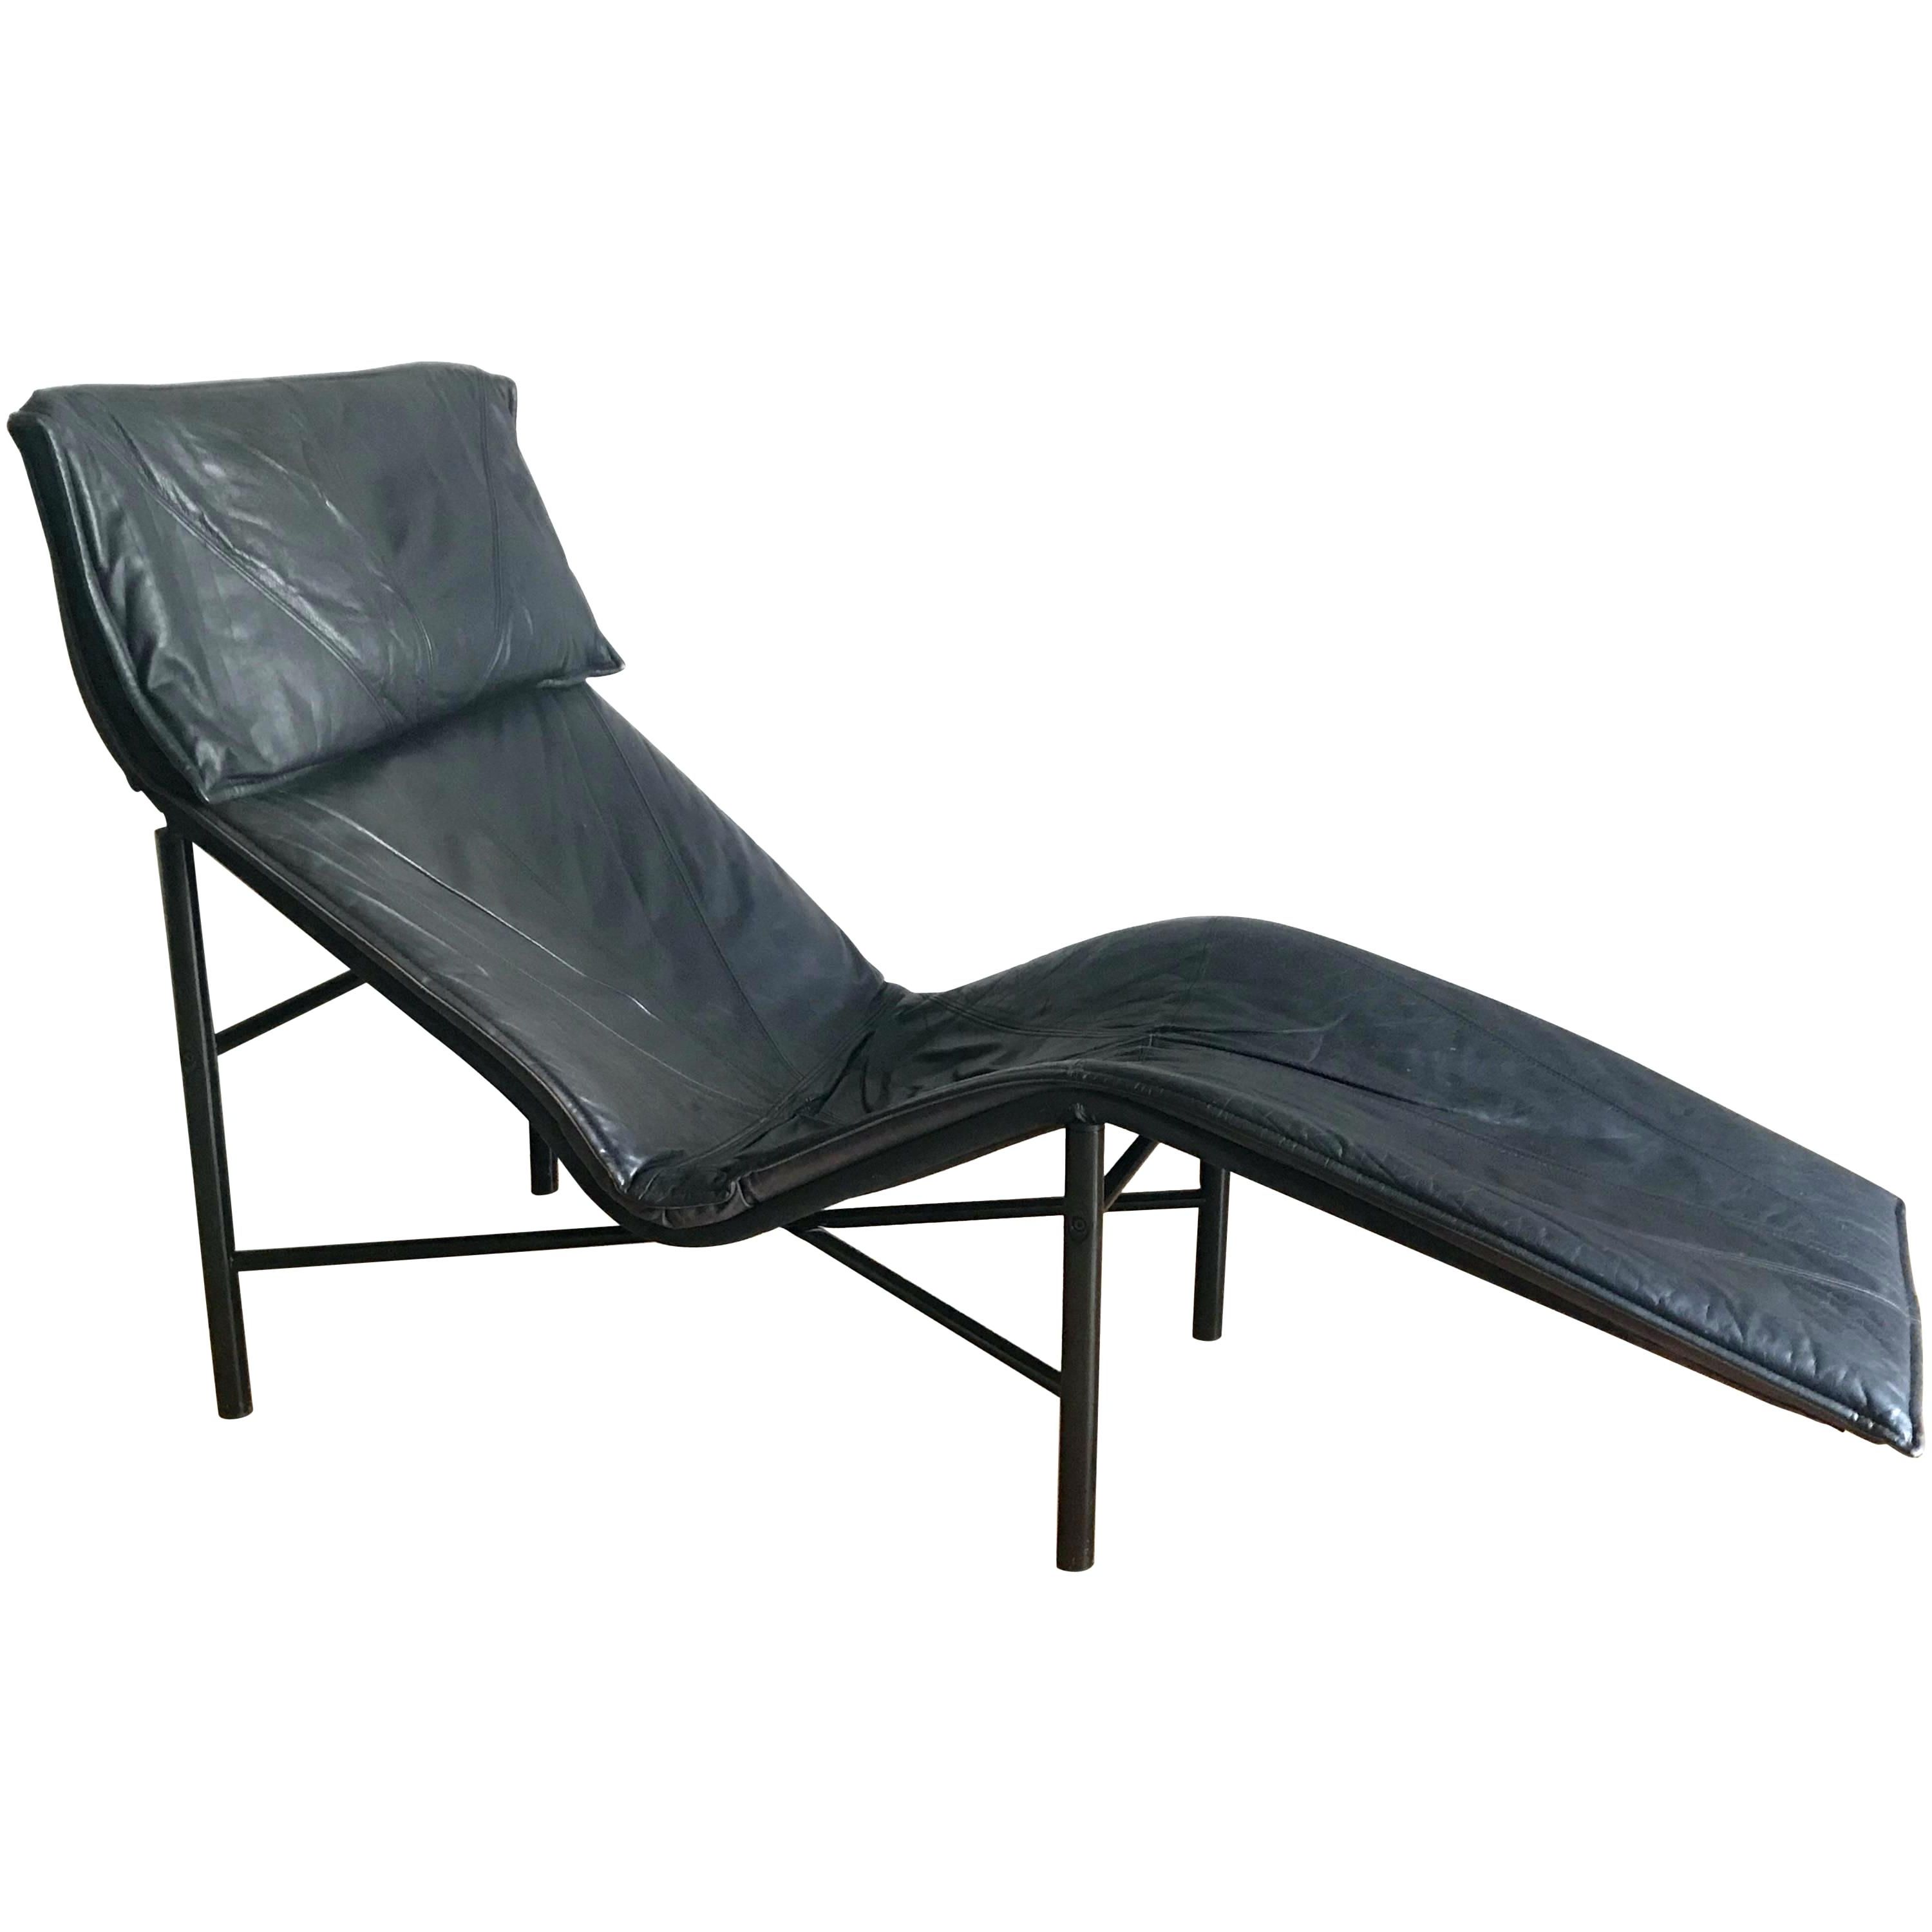 Preferred Chaise Chairs For Sale – Alexwomack Inside Adelaide Chaise Lounge Chairs (View 14 of 15)